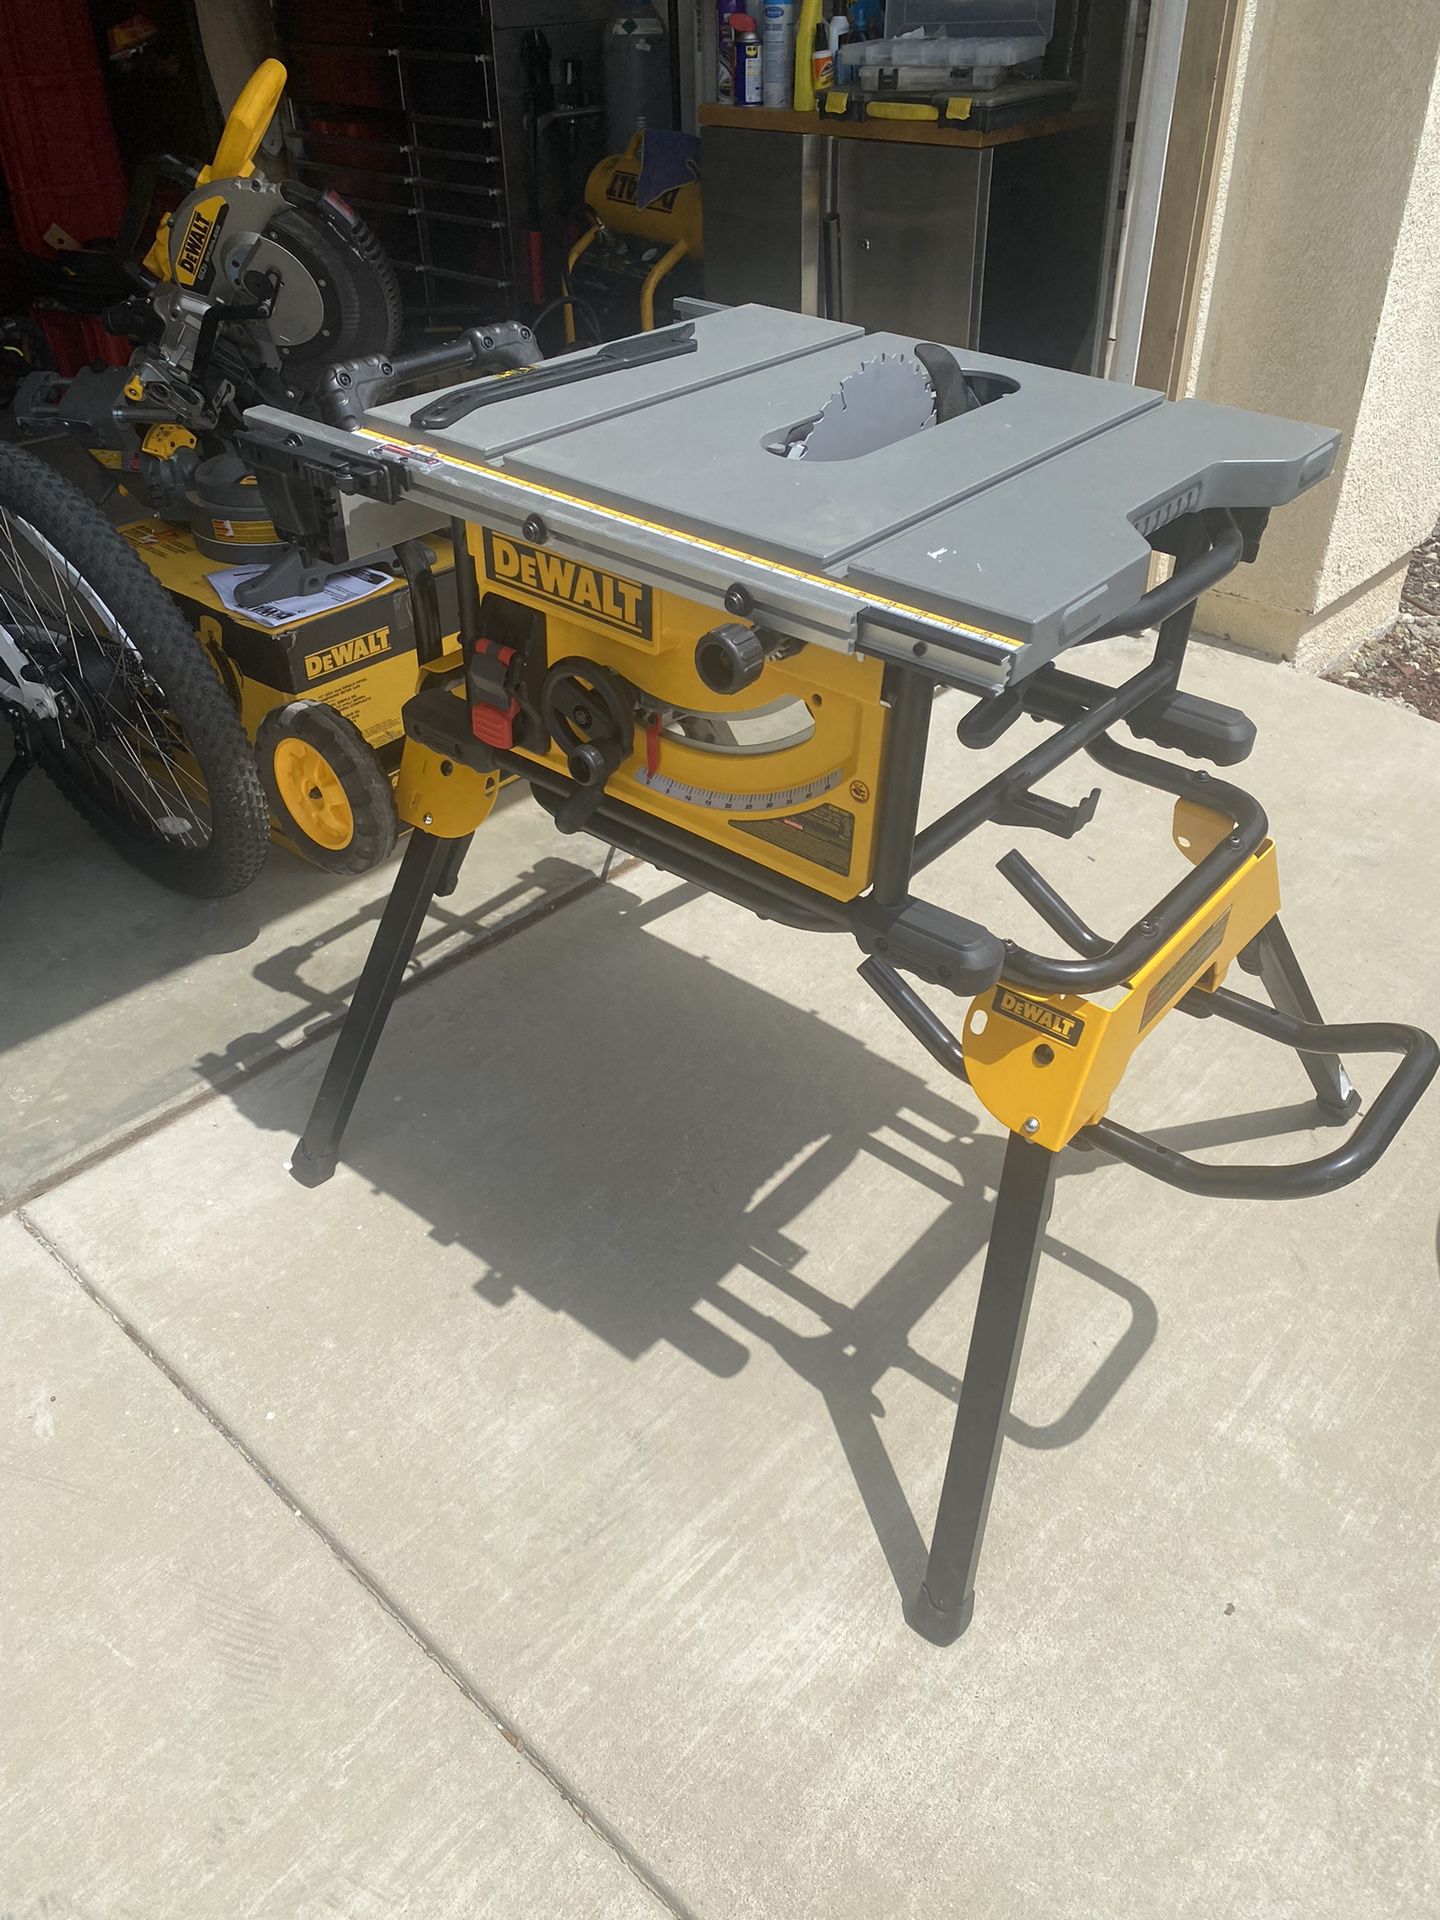 10” Table Saw Dewalt With Stand 